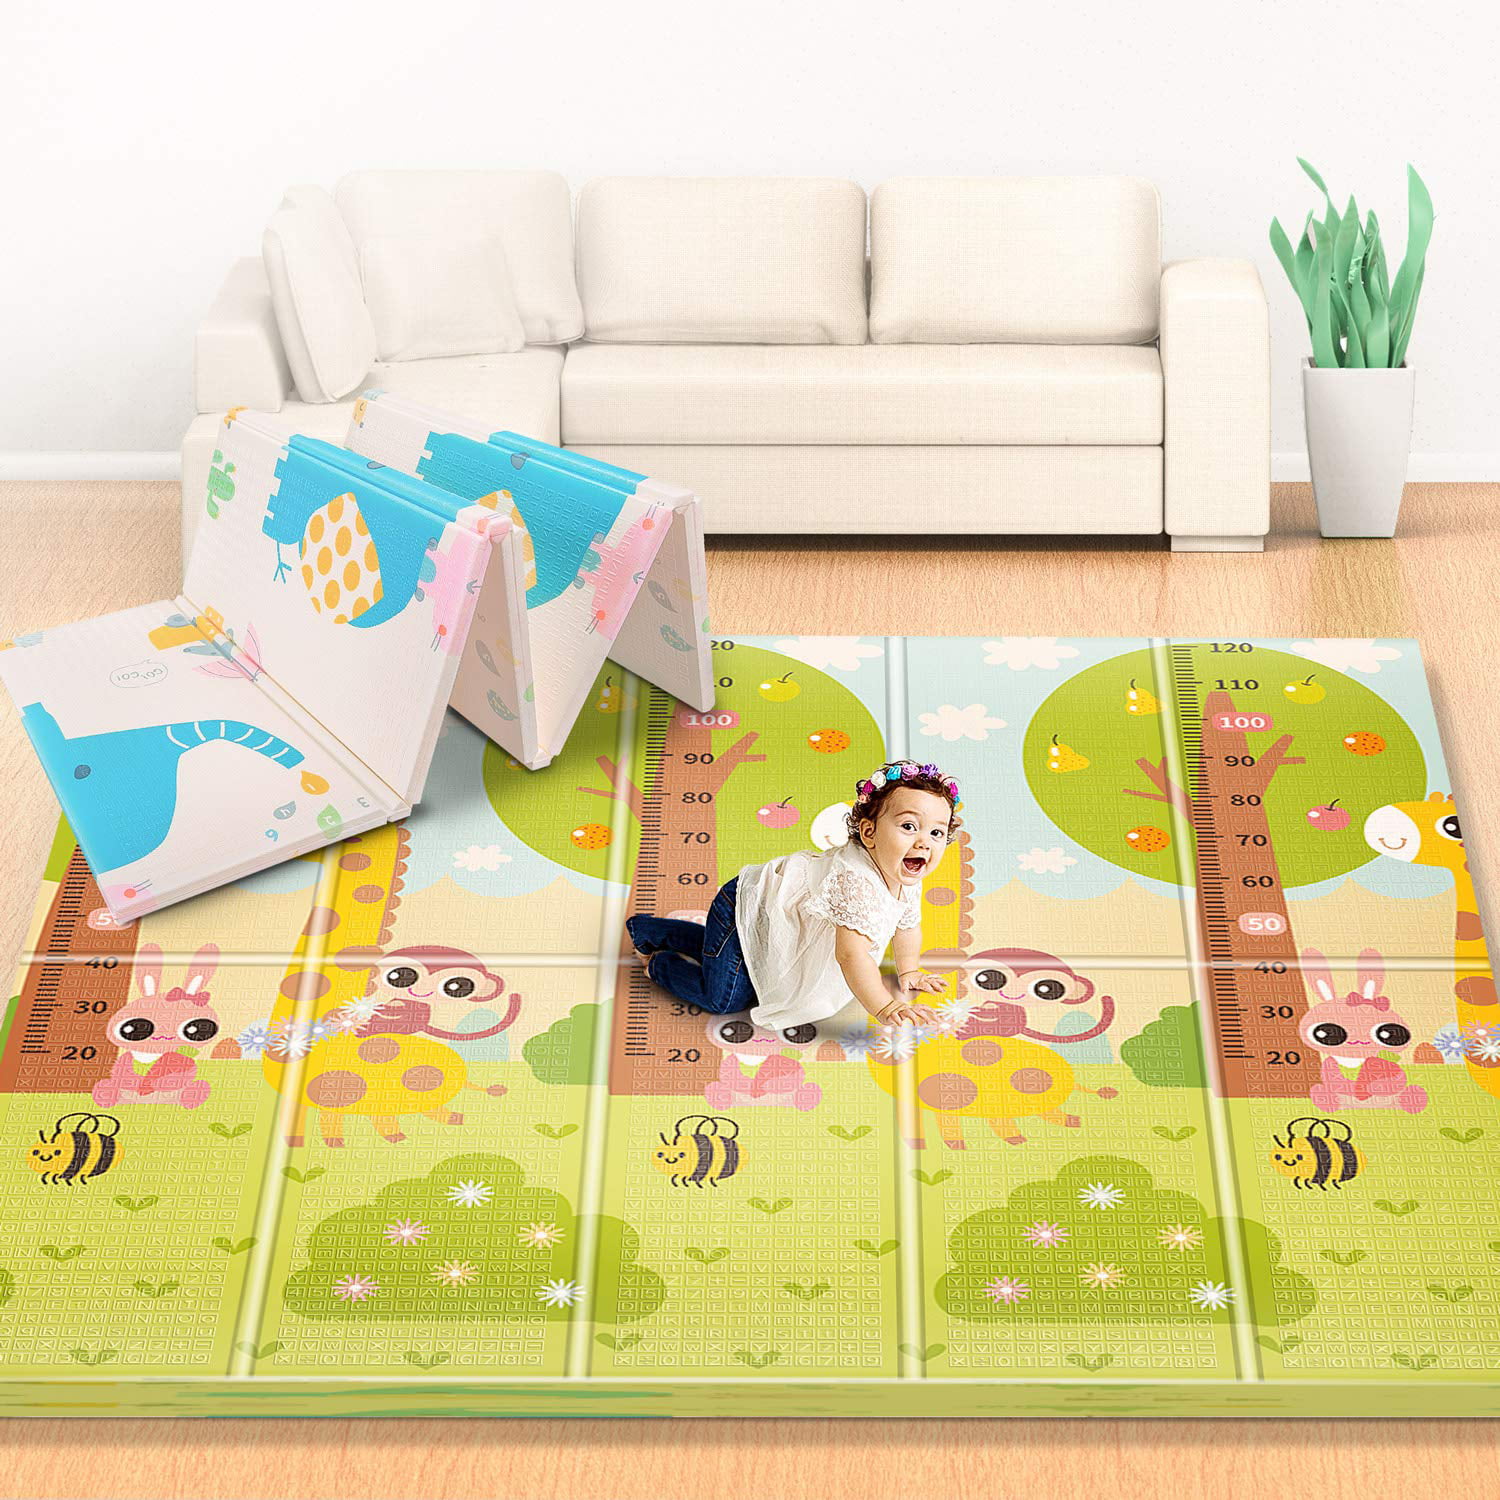 Folding Portable Playmat for Baby Toddlers 79 x 71 Easy to Clean Extra Large Reversible Crawling Mat Letters Premium Foldable Baby Play Mat ,0.6 Extra Thick Non-Toxic Foam Floor Mat